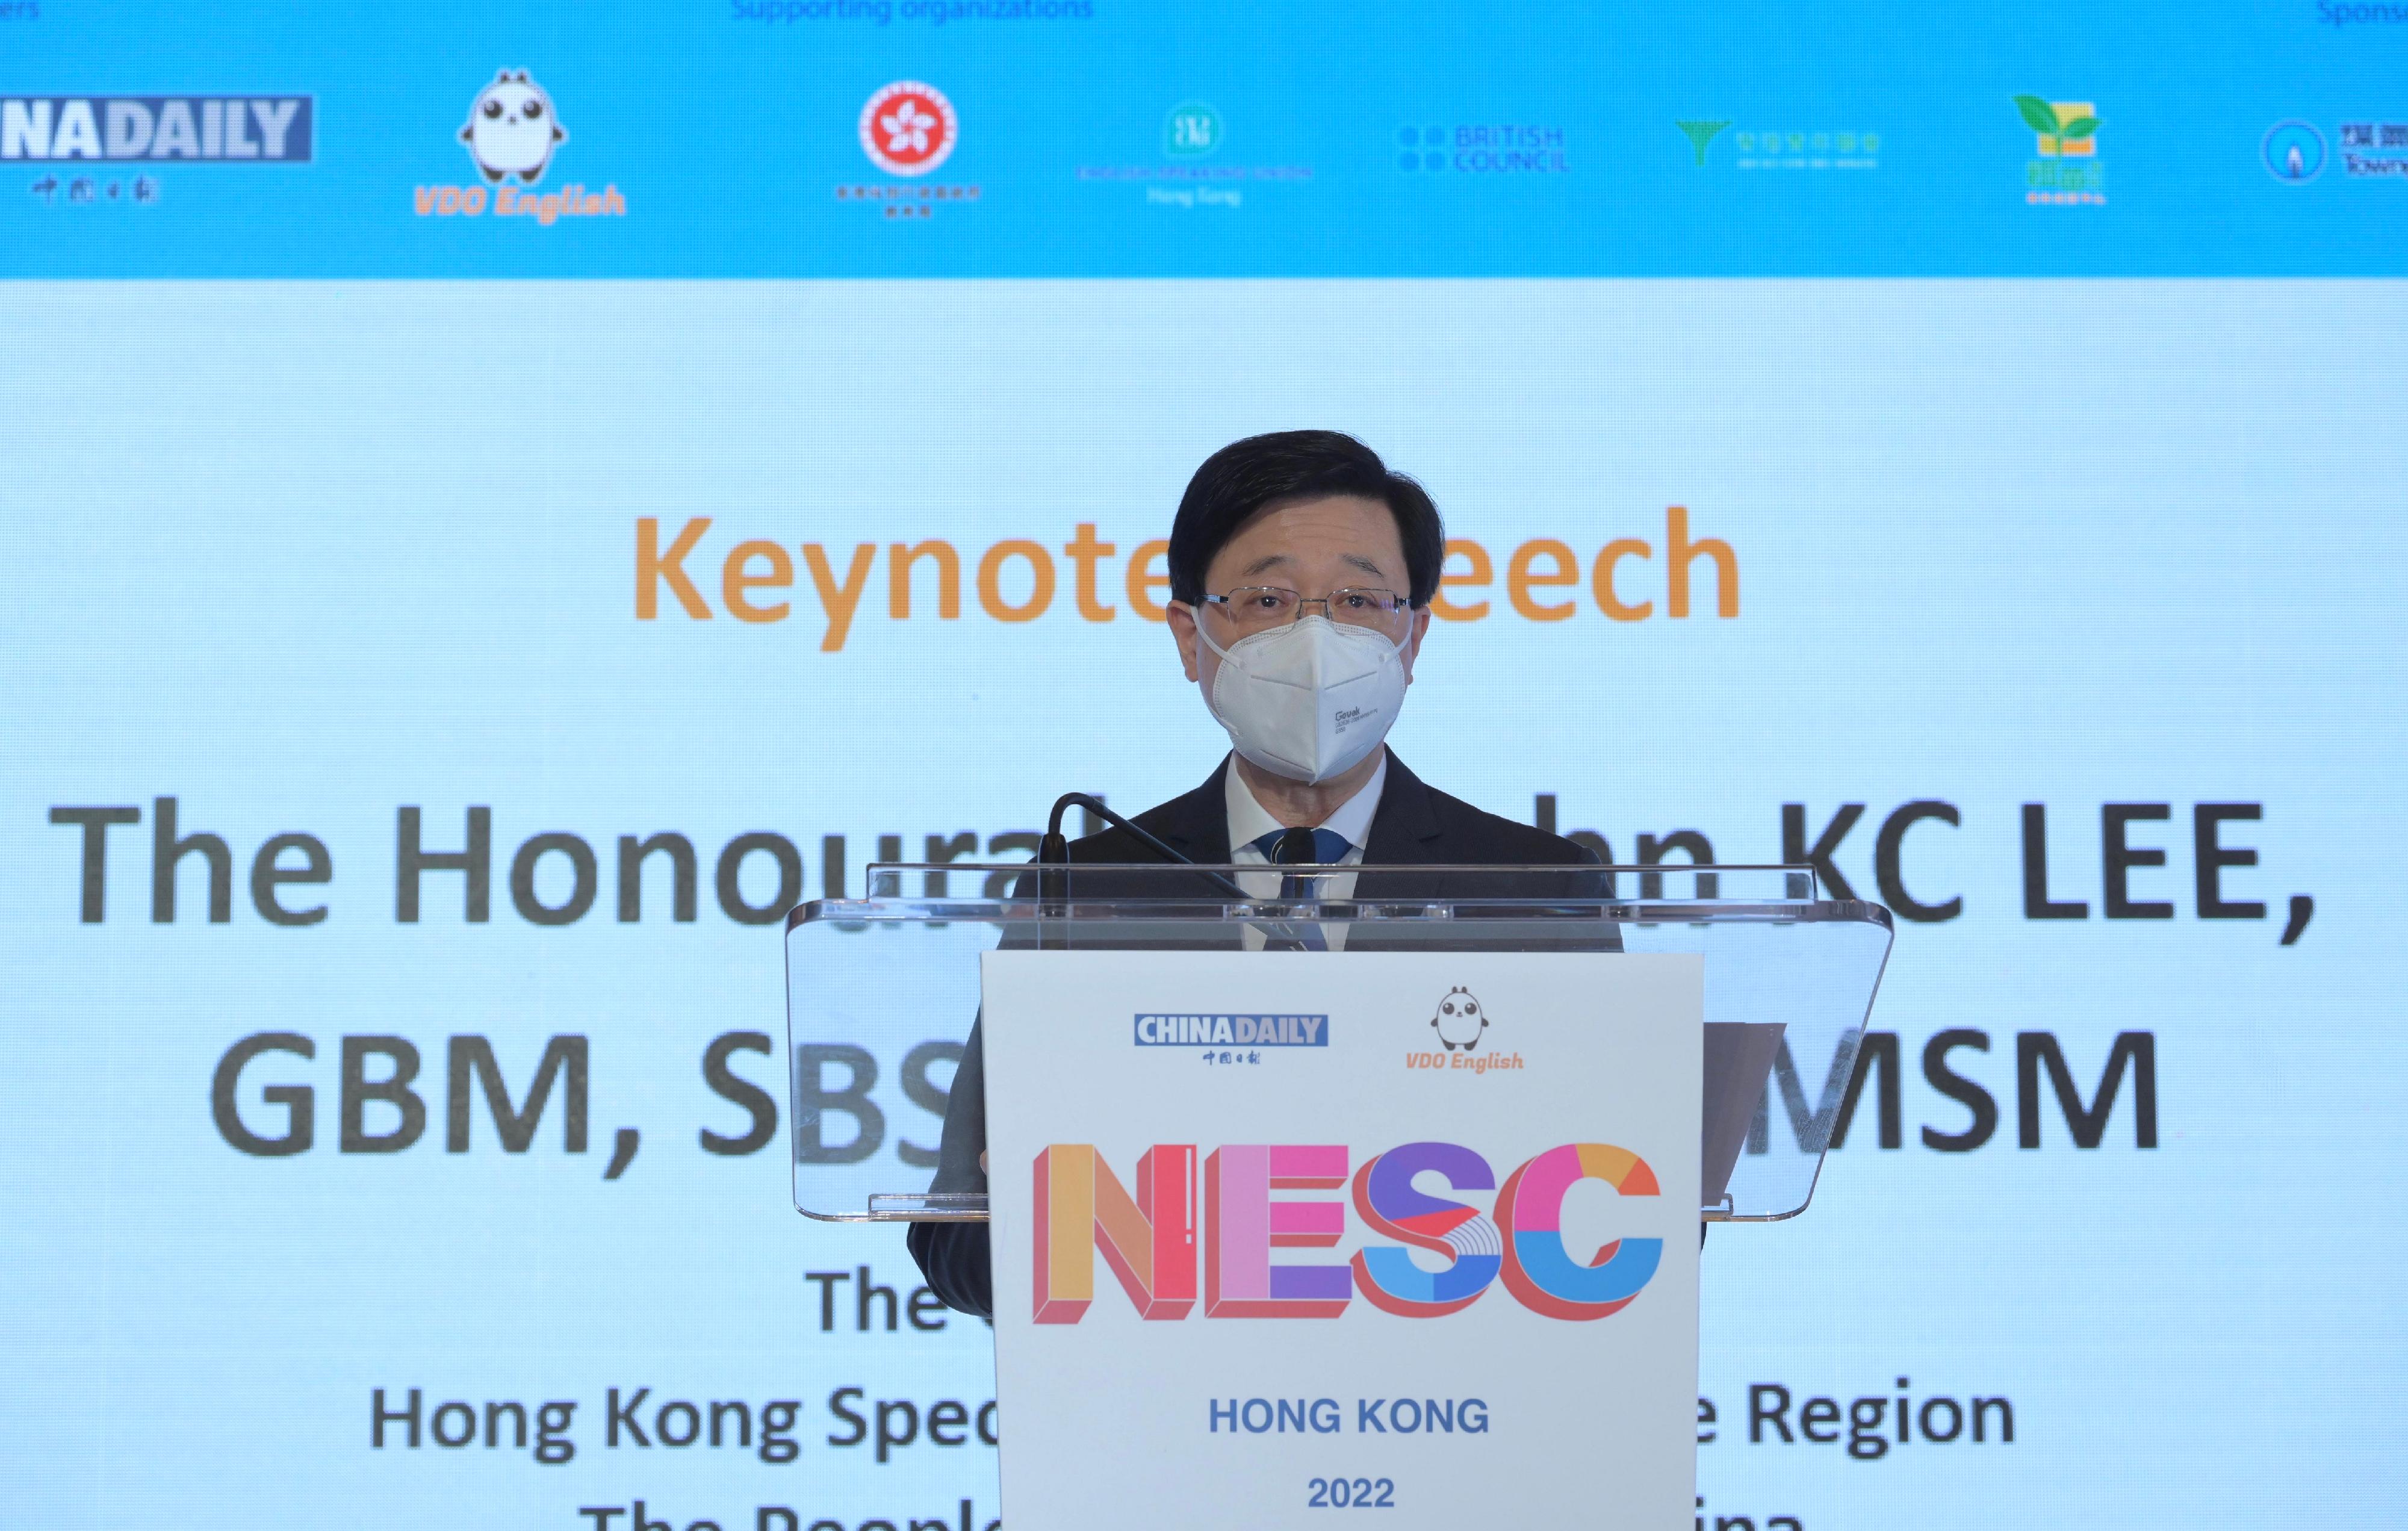 The Chief Executive, Mr John Lee, speaks at the 21st Century Cup National English Speaking Competition Hong Kong Region Awards Ceremony 2022 today (August 21).